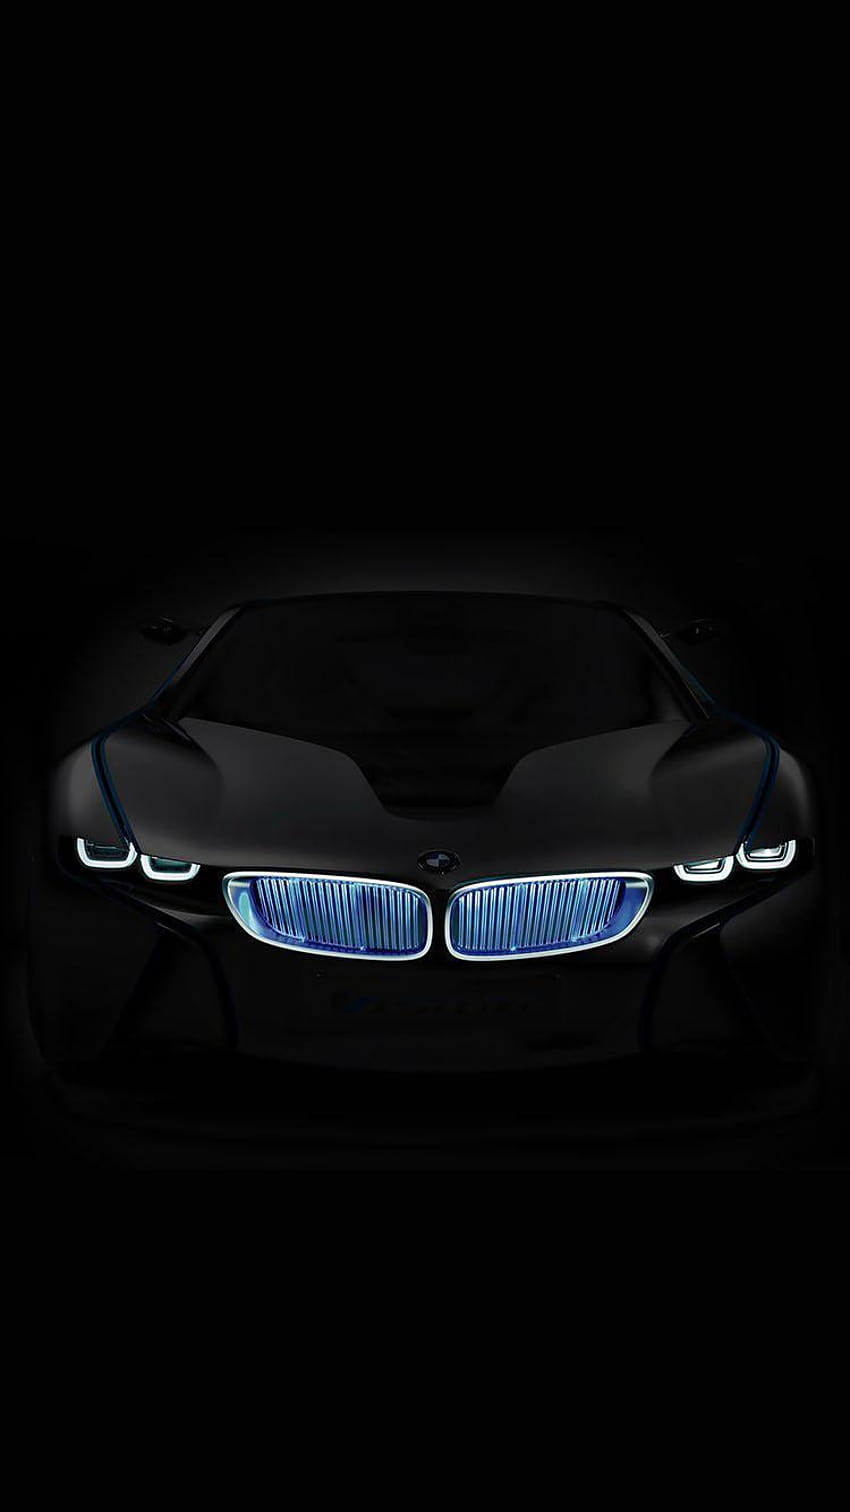 BMW i8 From Mission Impossible 4 iPhone 6, mission impossible 6 HD phone wallpaper